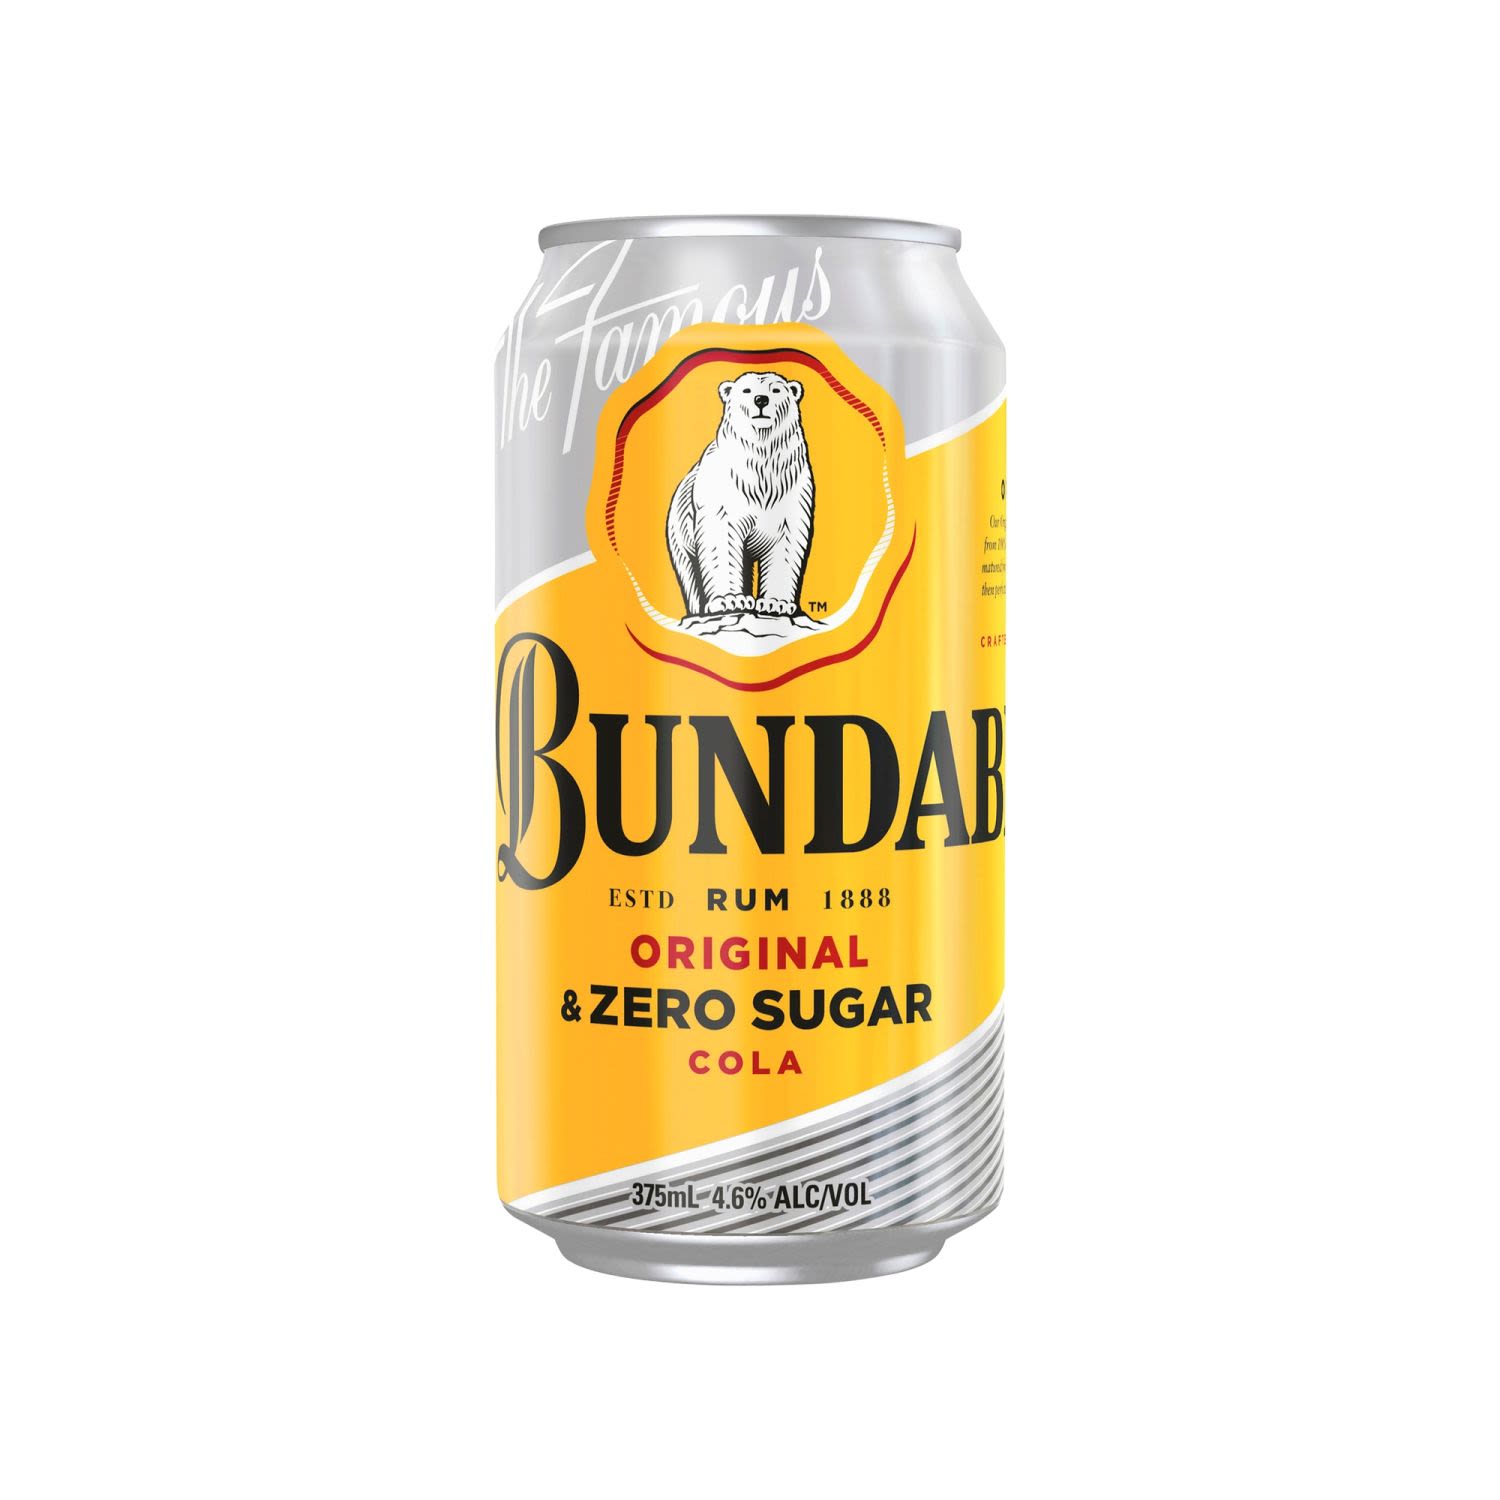 Sweetly scented with hints of oak, complimented by the sweetness of the cola<br /> <br />Alcohol Volume: 4.60%<br /><br />Pack Format: Can<br /><br />Standard Drinks: 1.4</br /><br />Pack Type: Can<br />